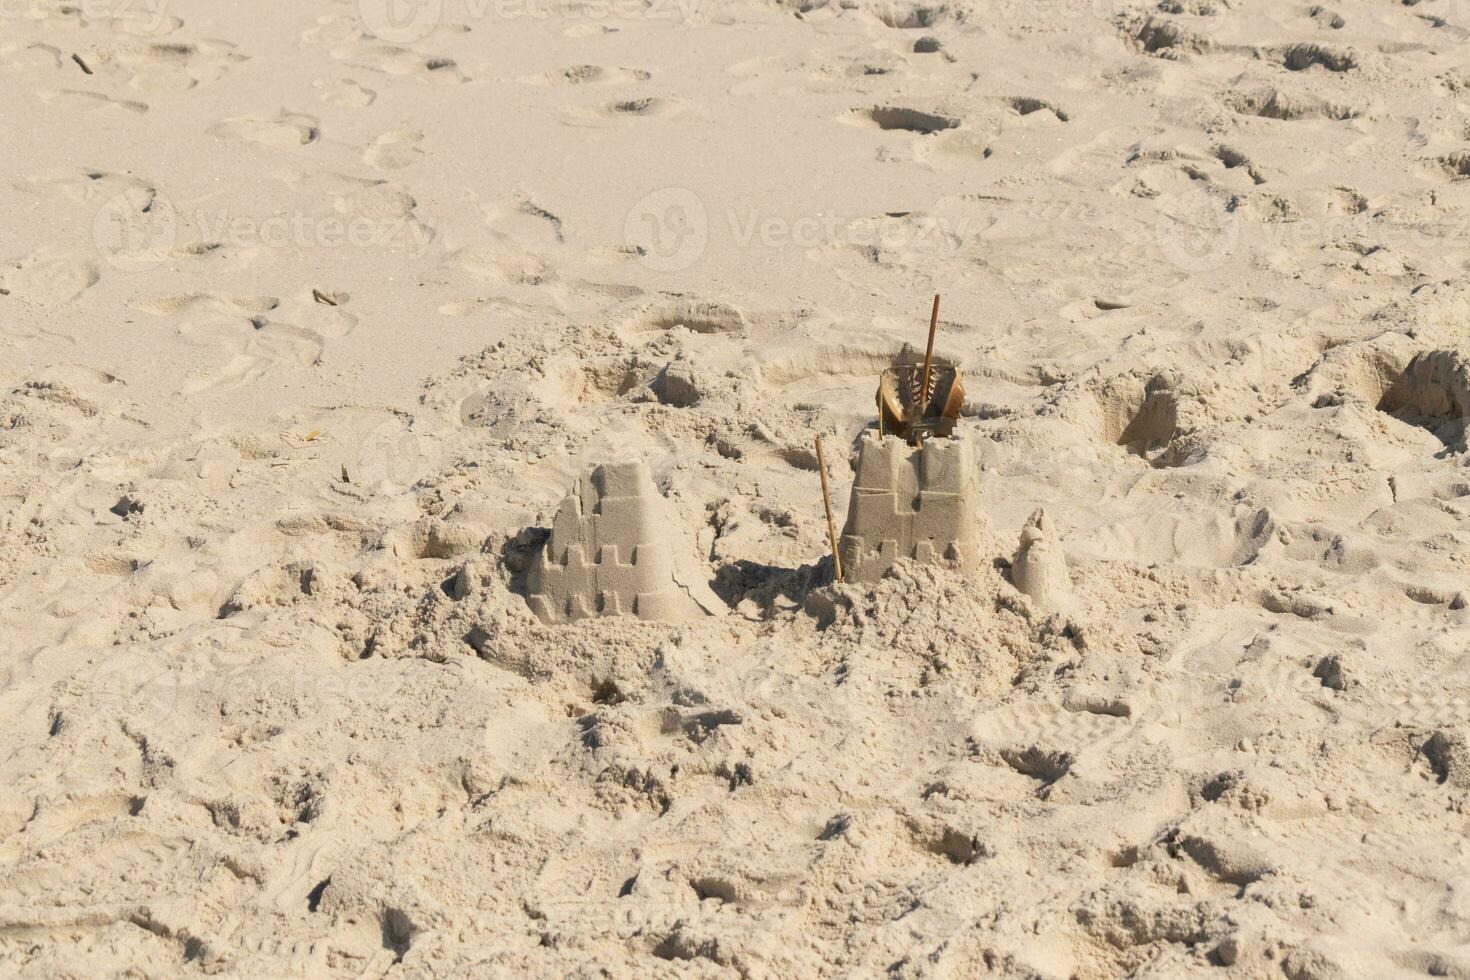 This beautiful brown sand castle is sitting here on this beach. The fort sits here with footprints all around. photo